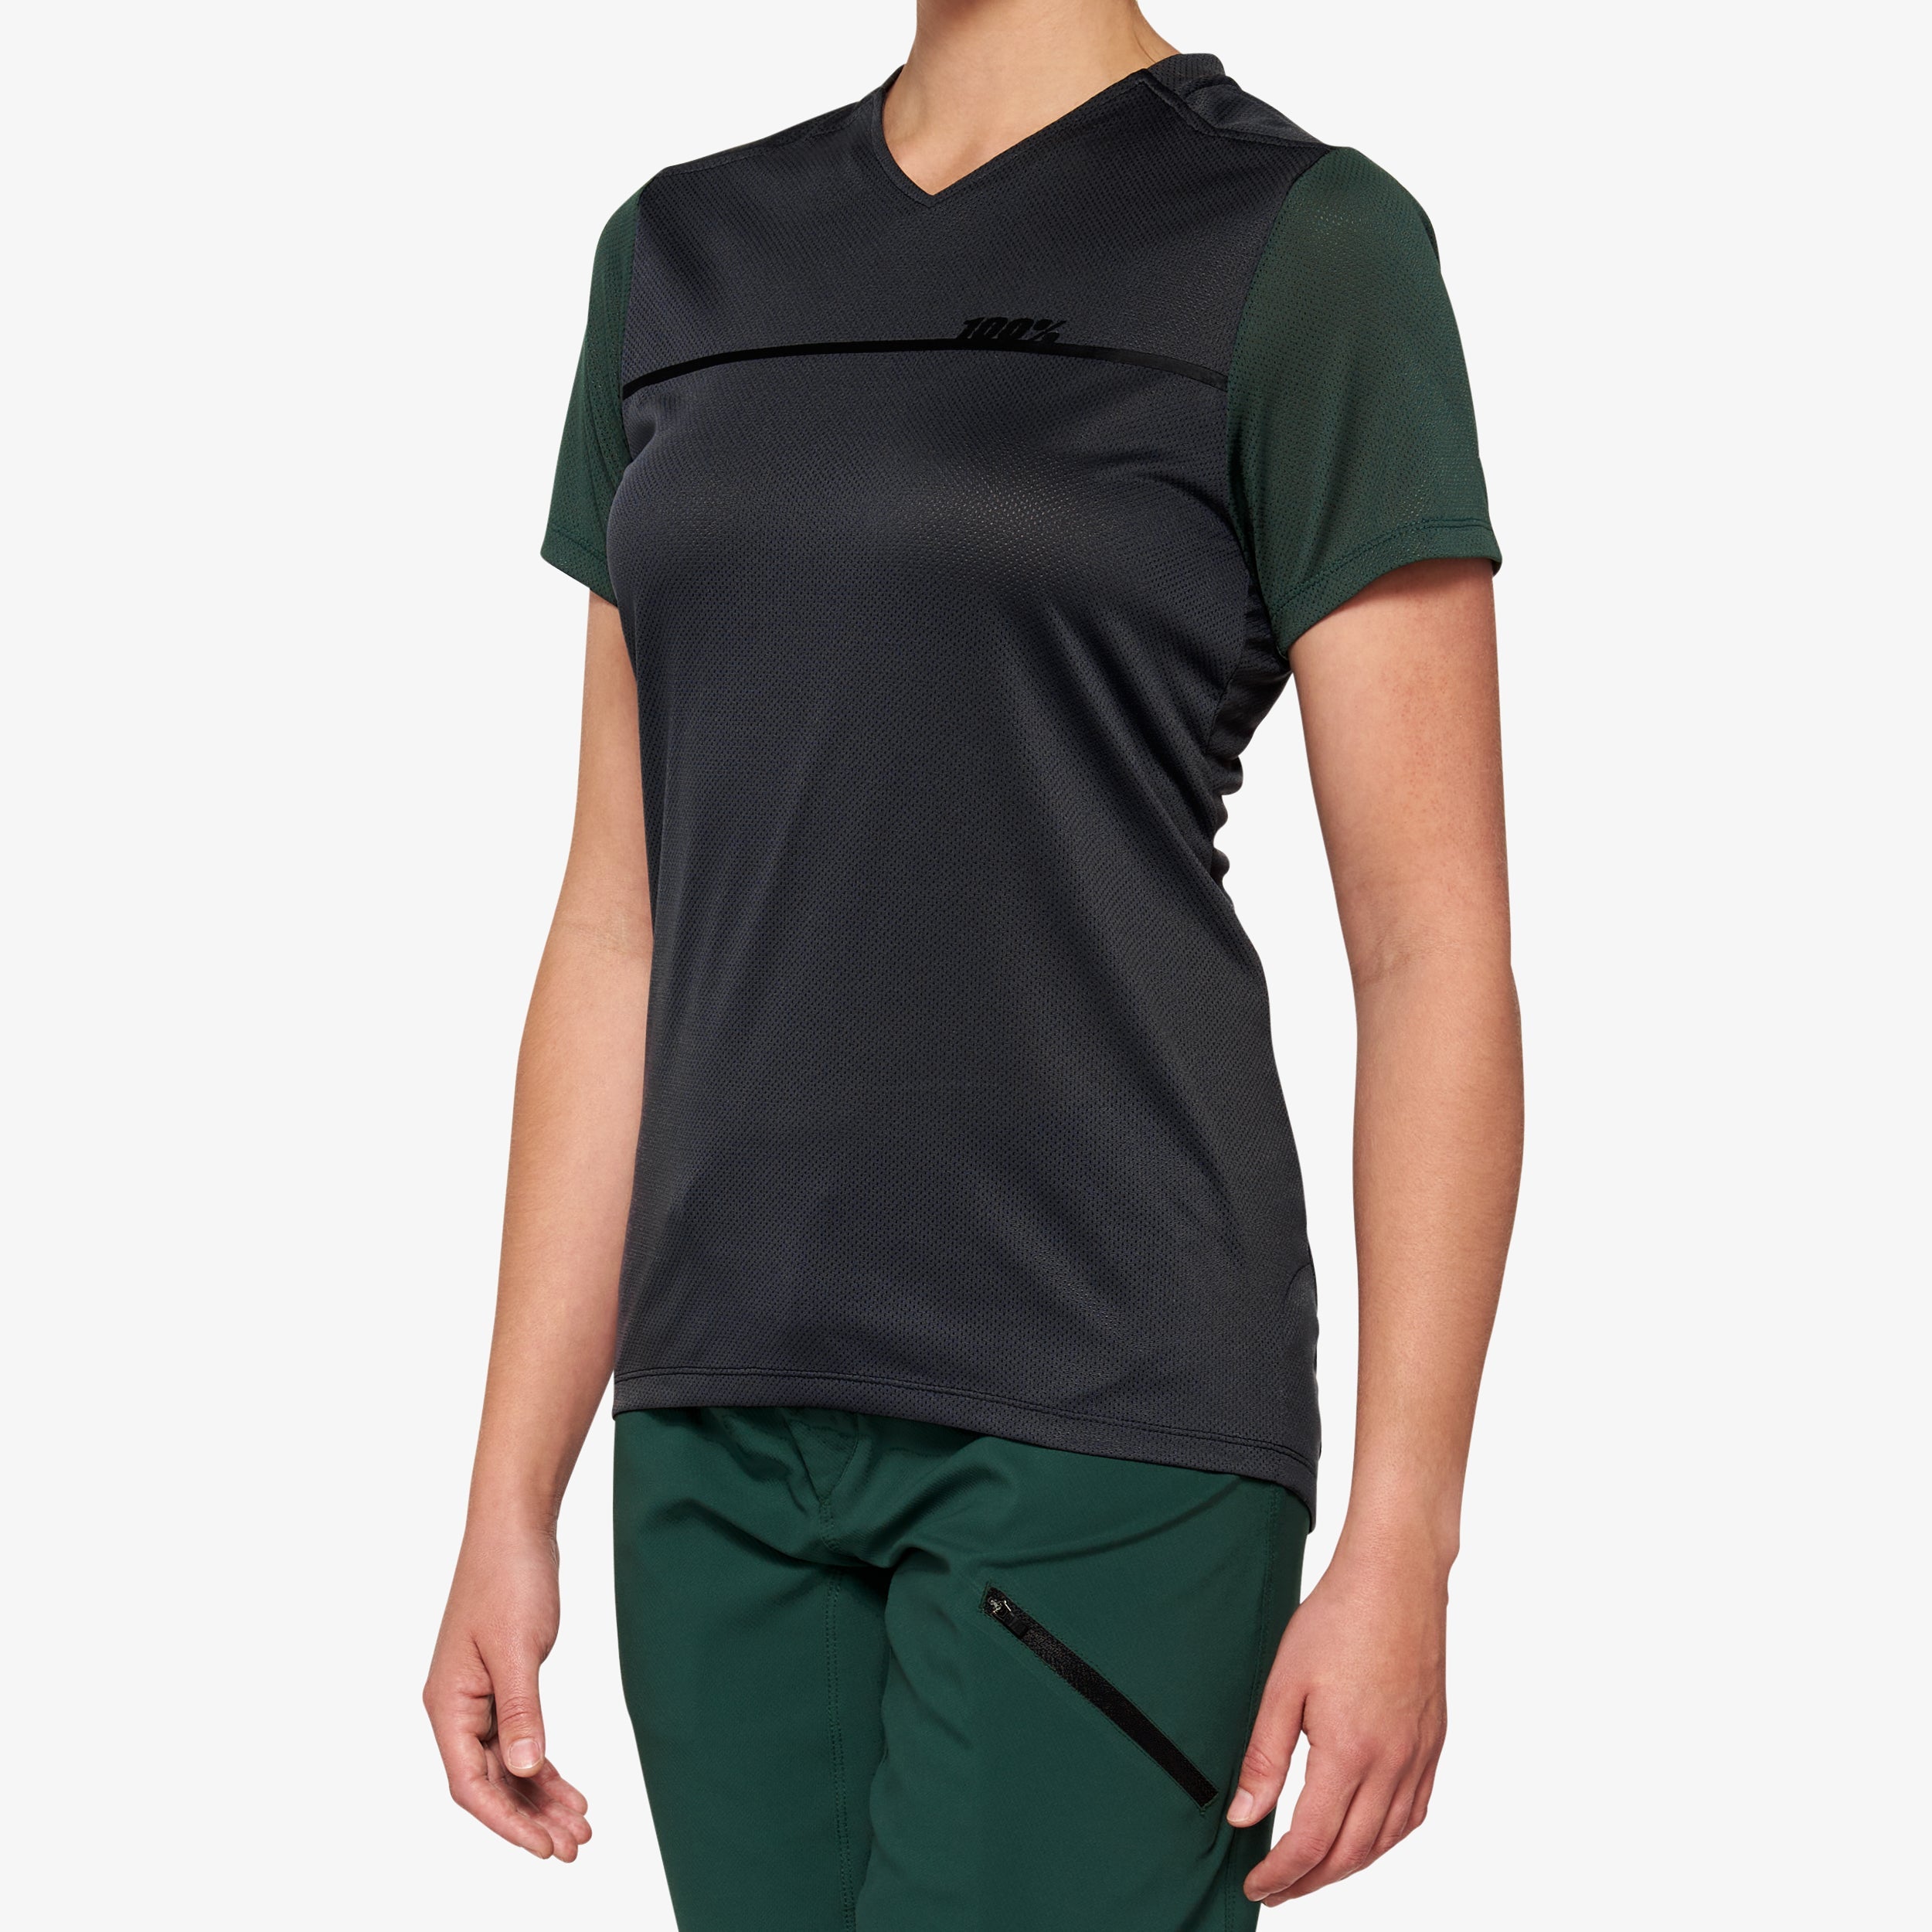 RIDECAMP Women's Short Sleeve Jersey Charcoal/Forest Green